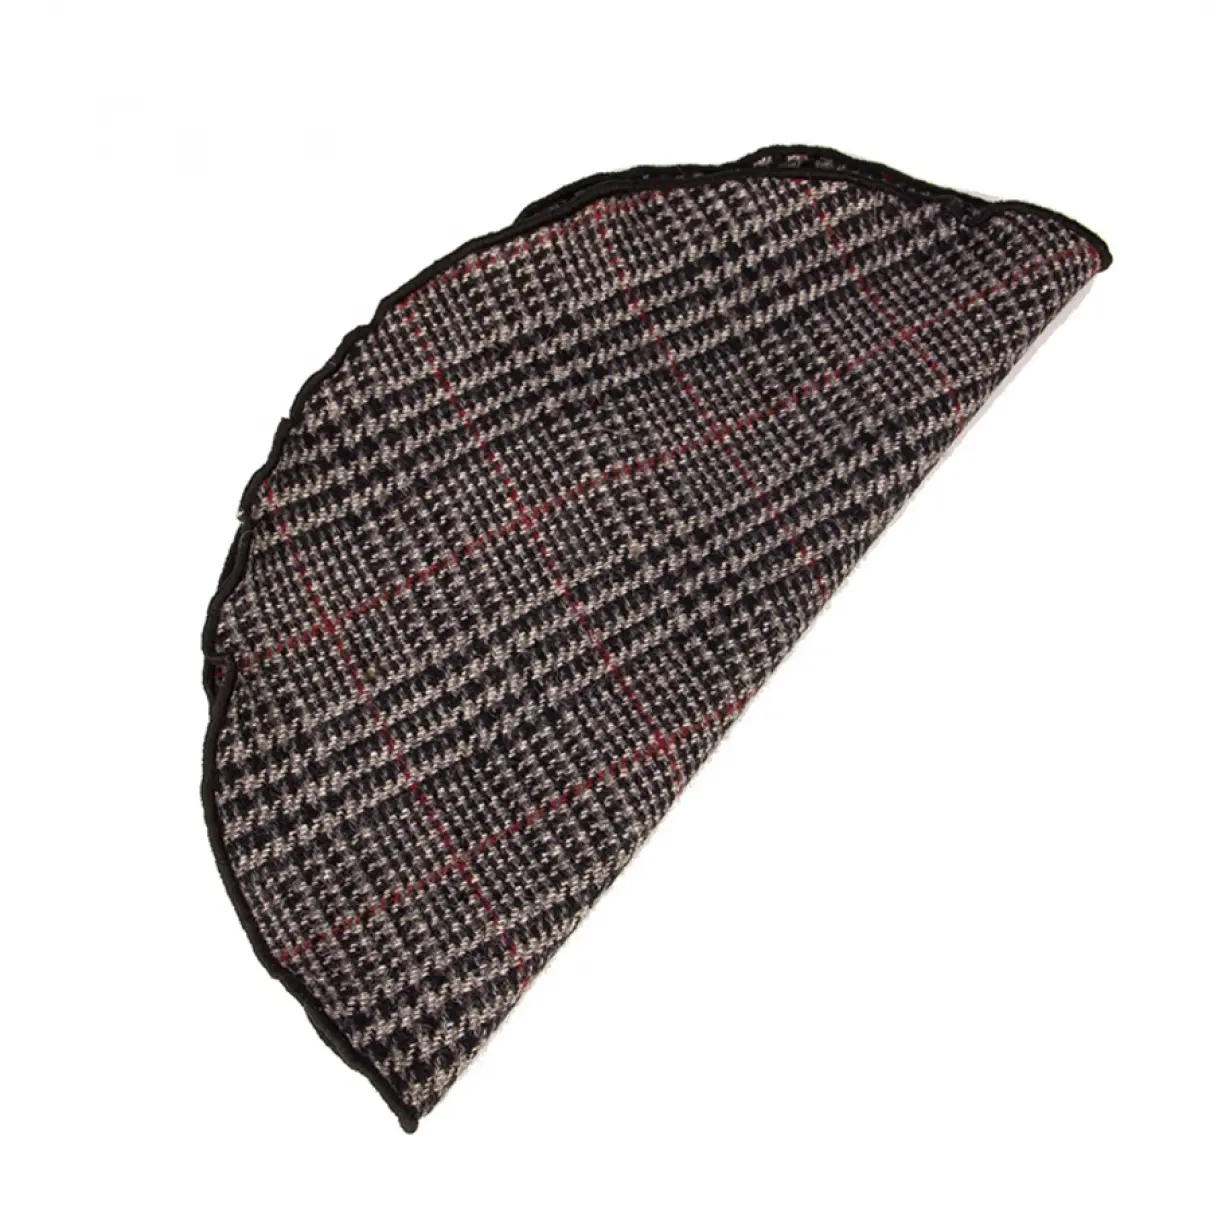 Buy Alexander Olch Wool scarf & pocket square online